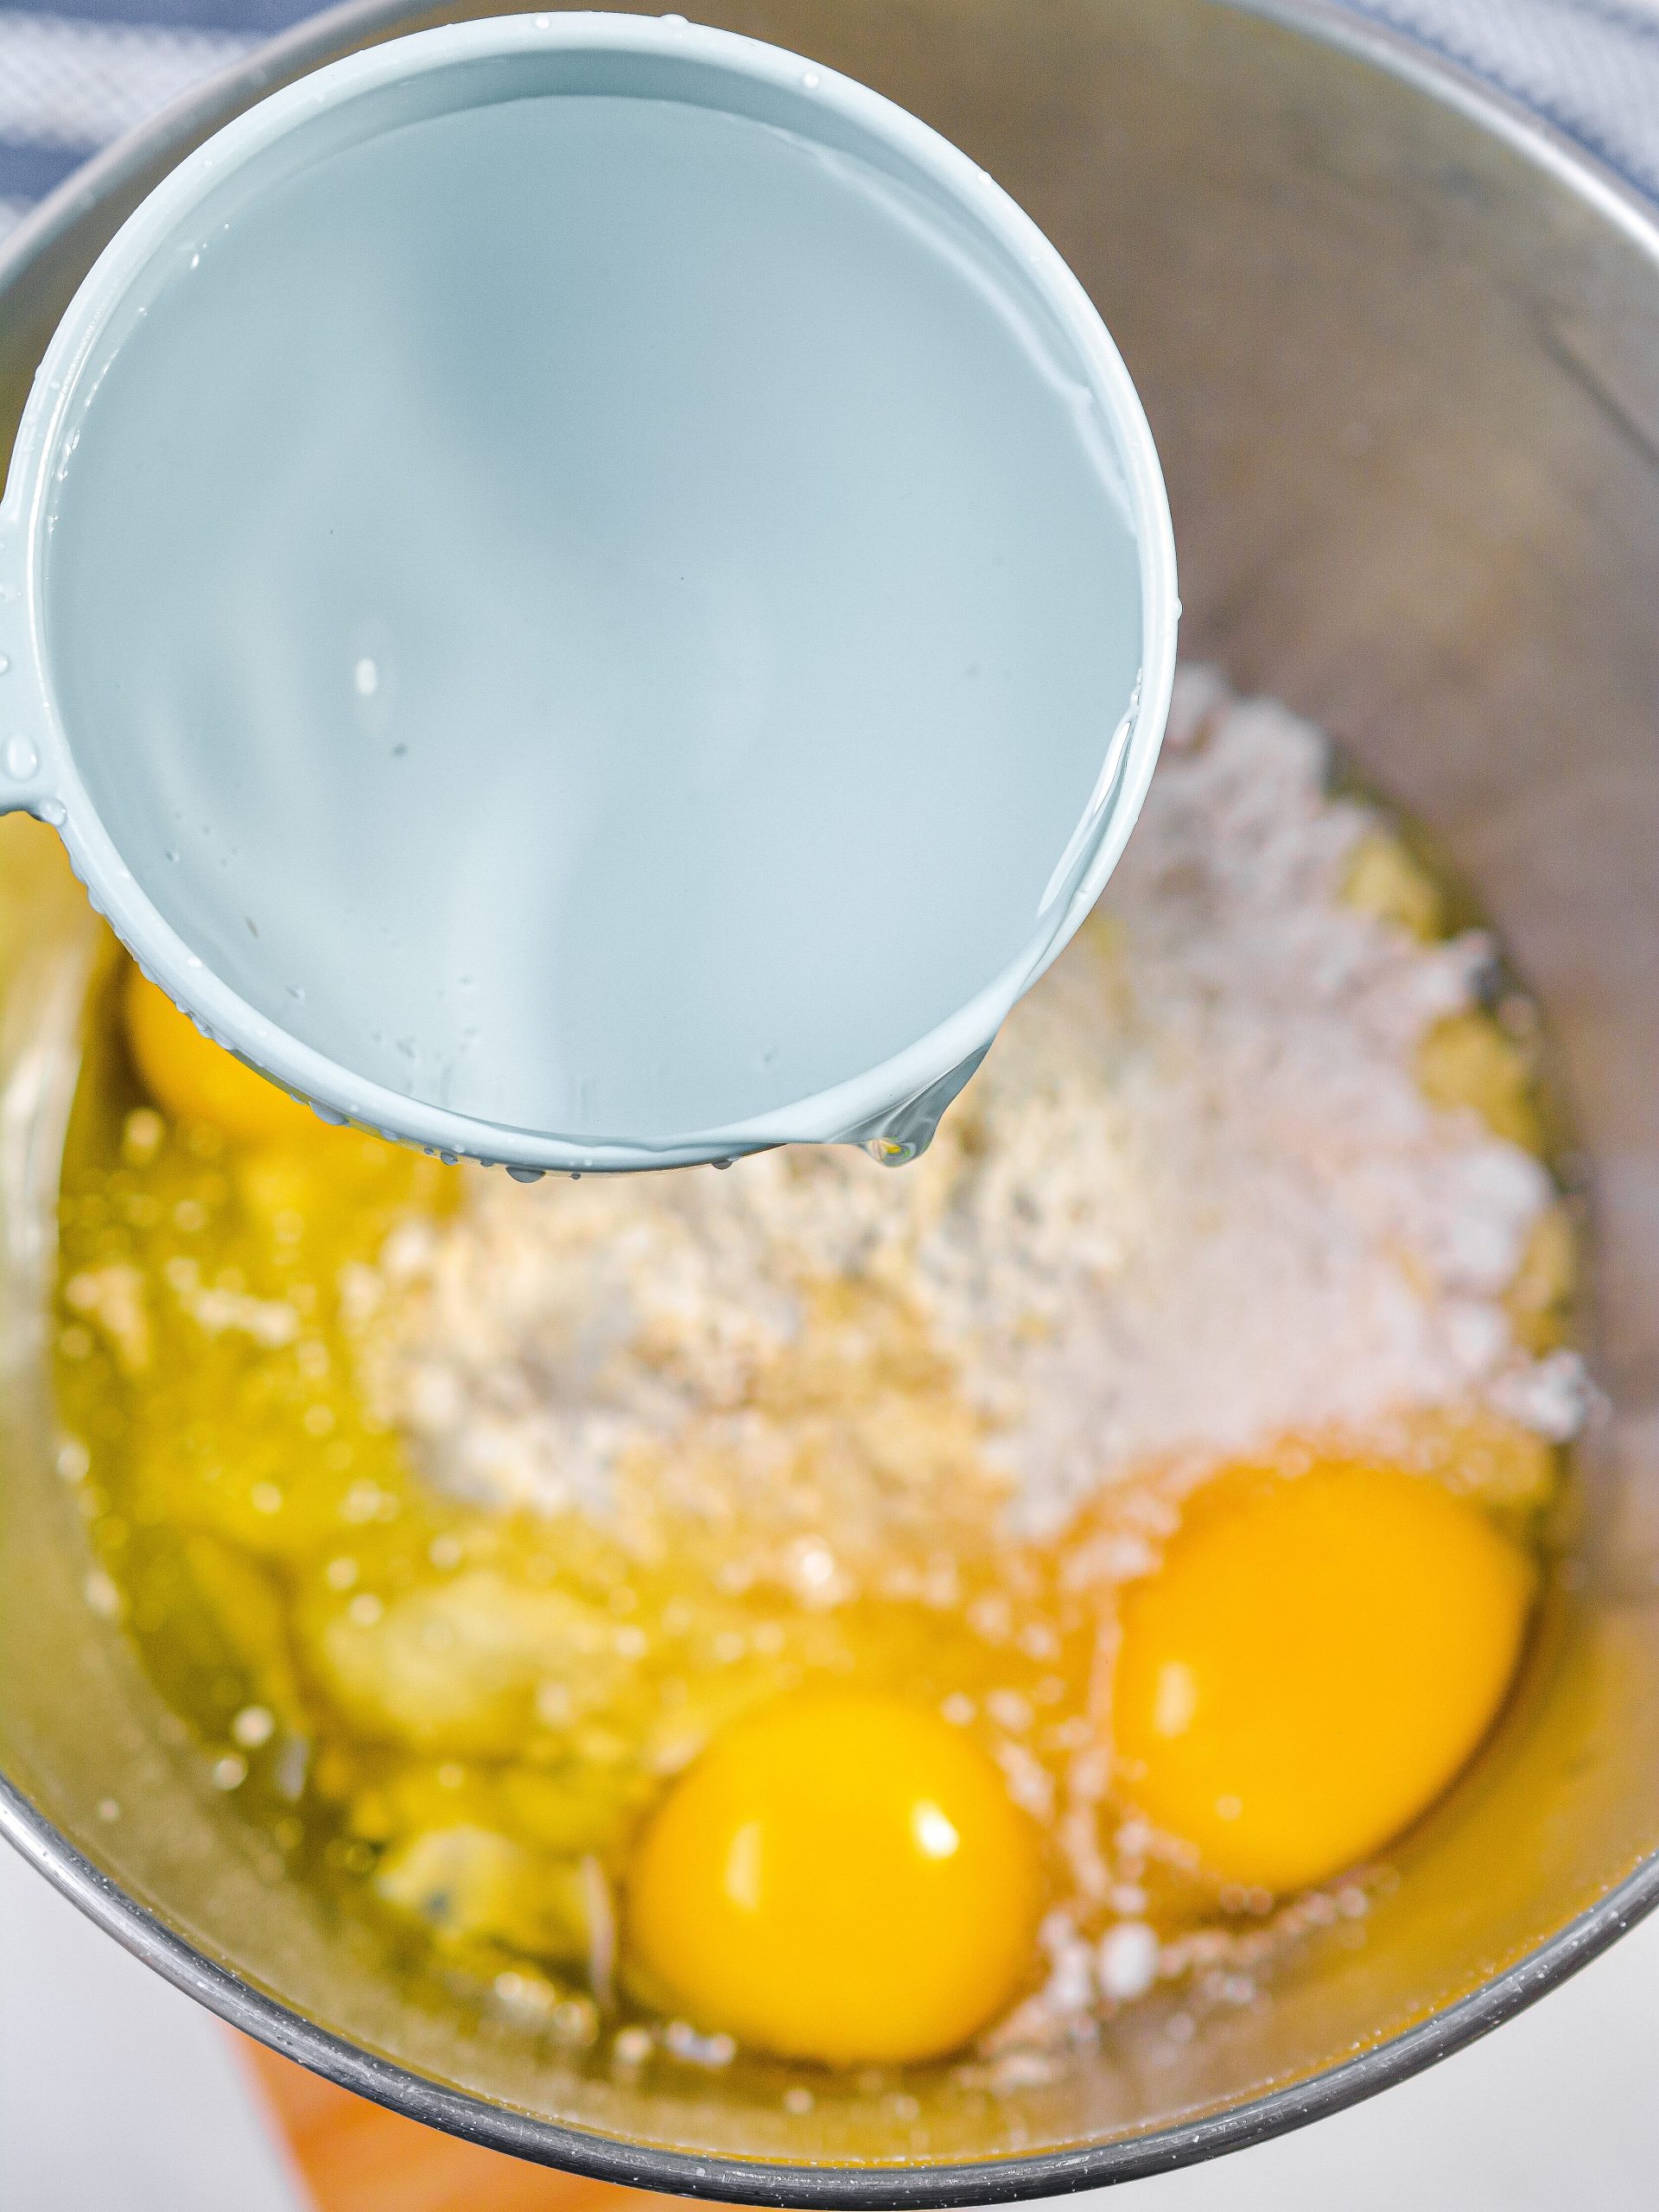  In a mixing bowl, combine the cake mix, eggs, and water.